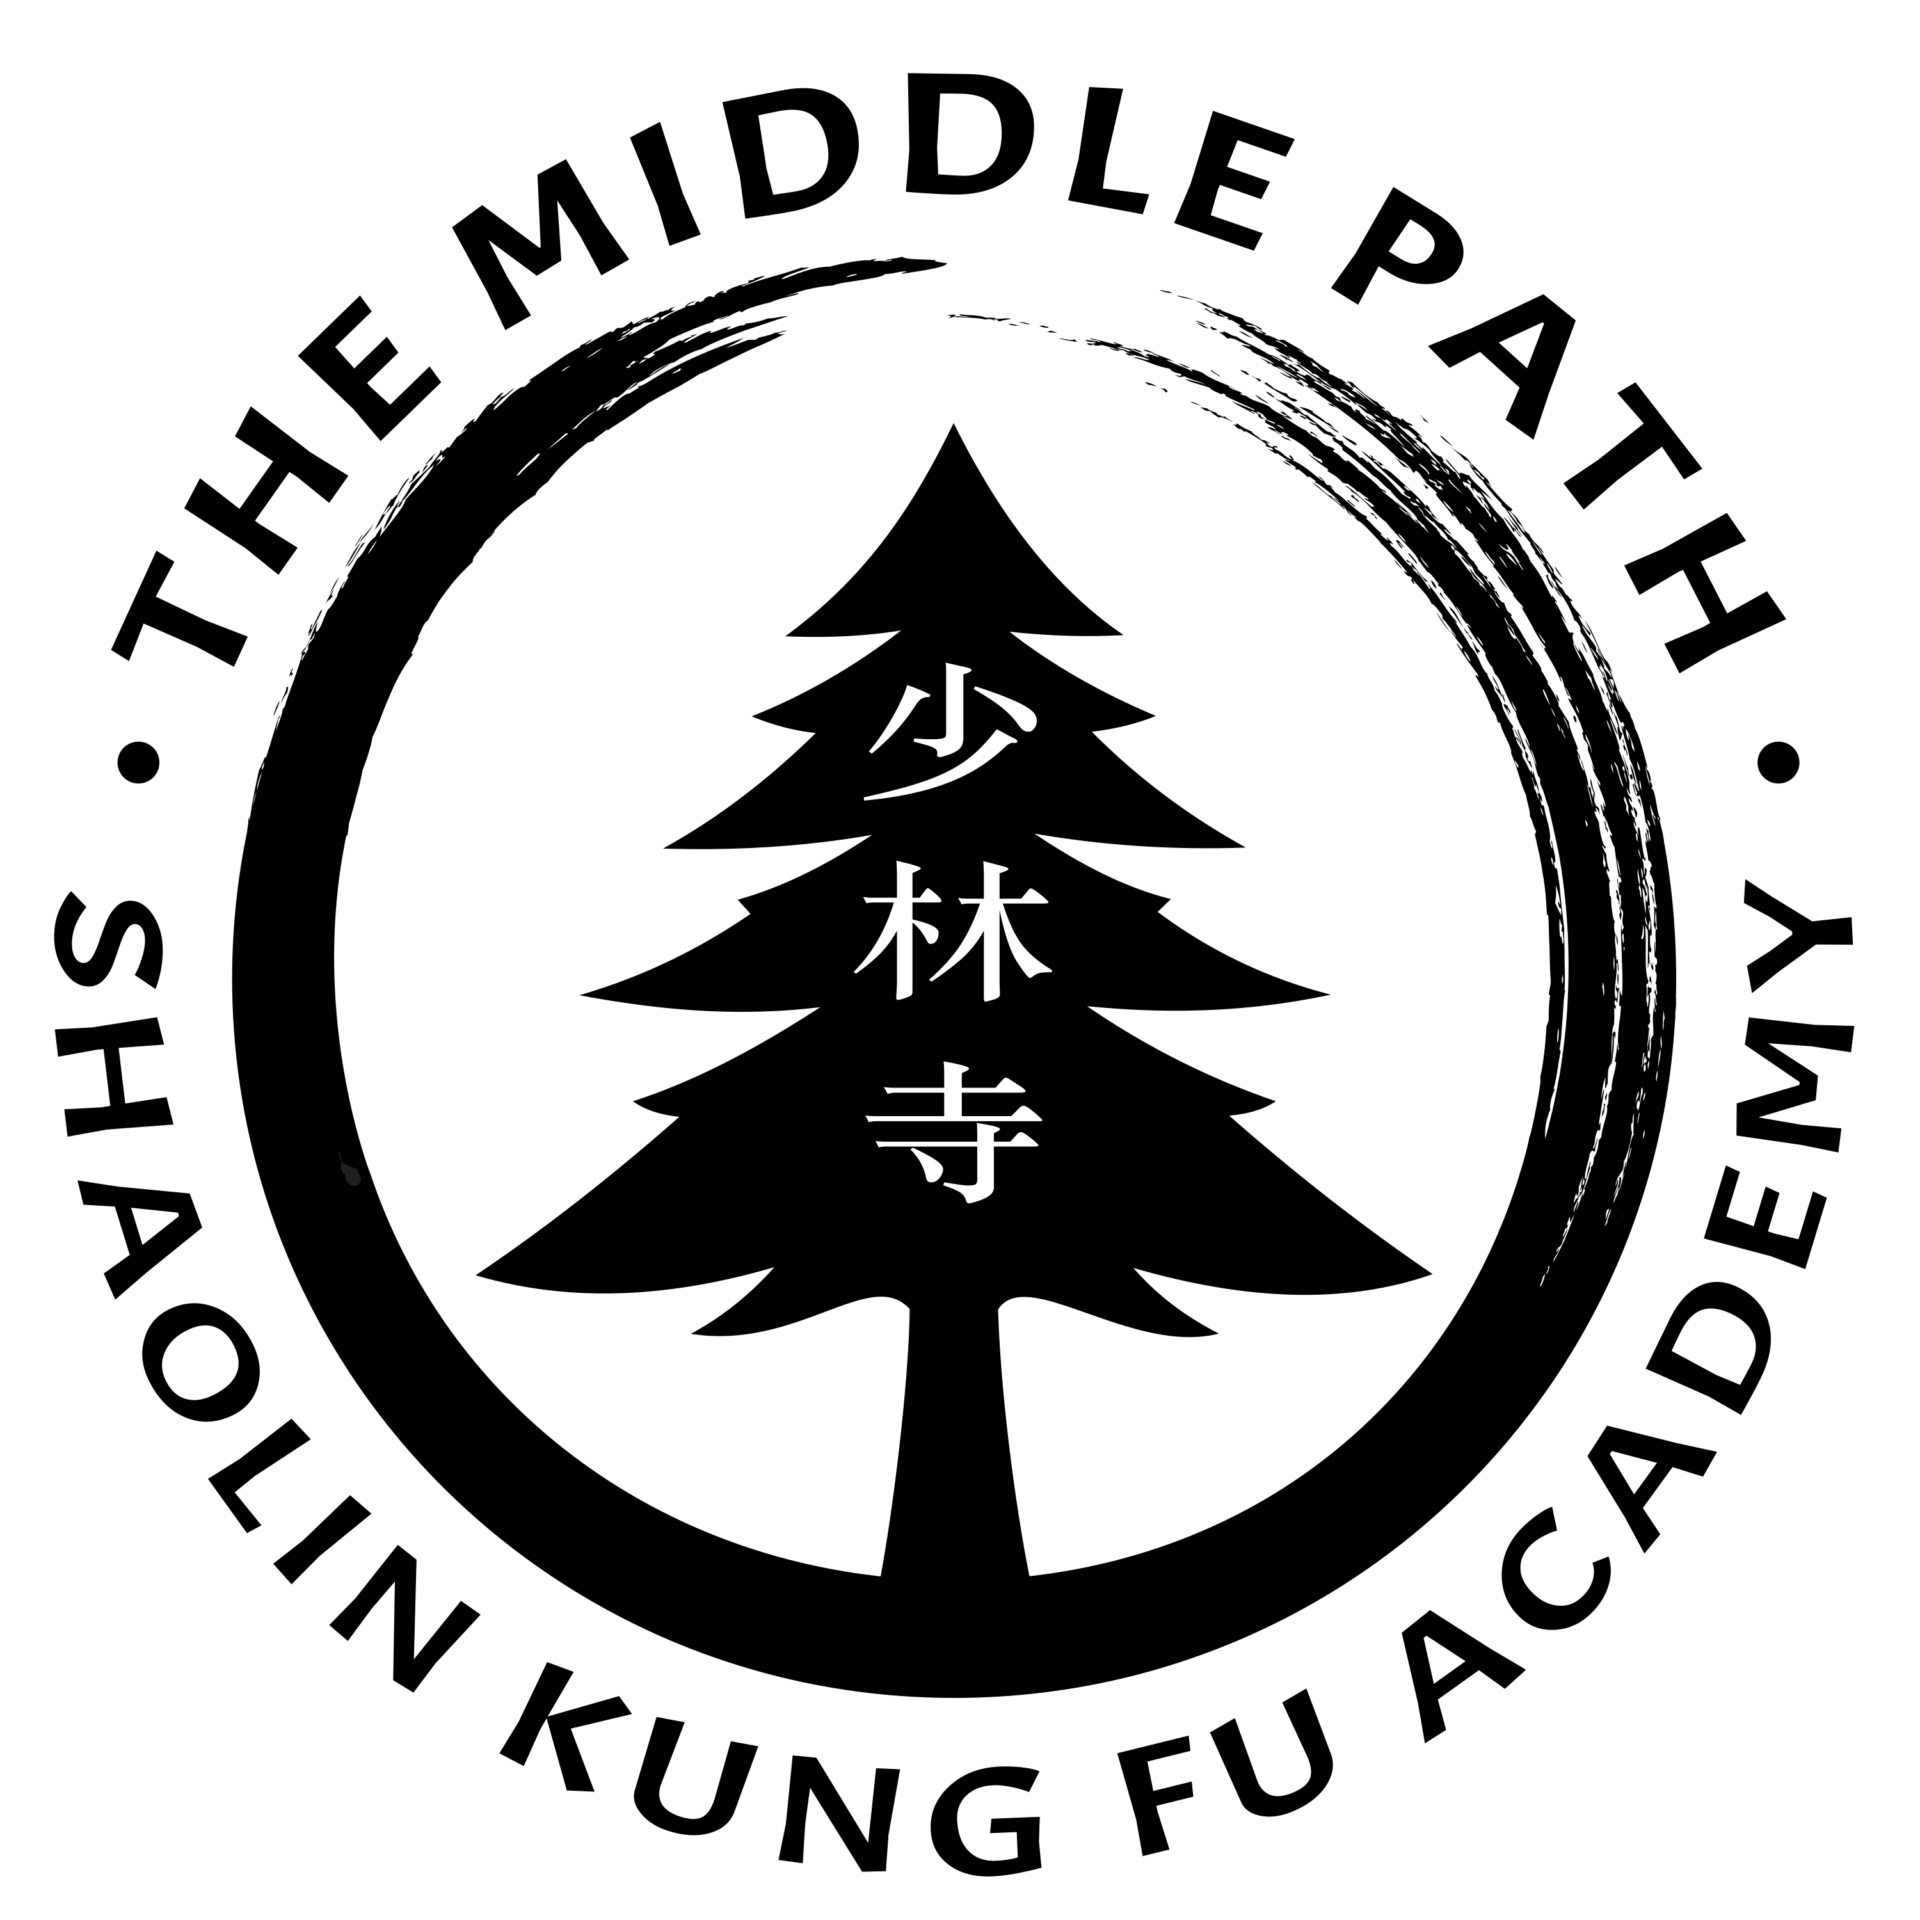 Our Middle Path Kung Fu logo